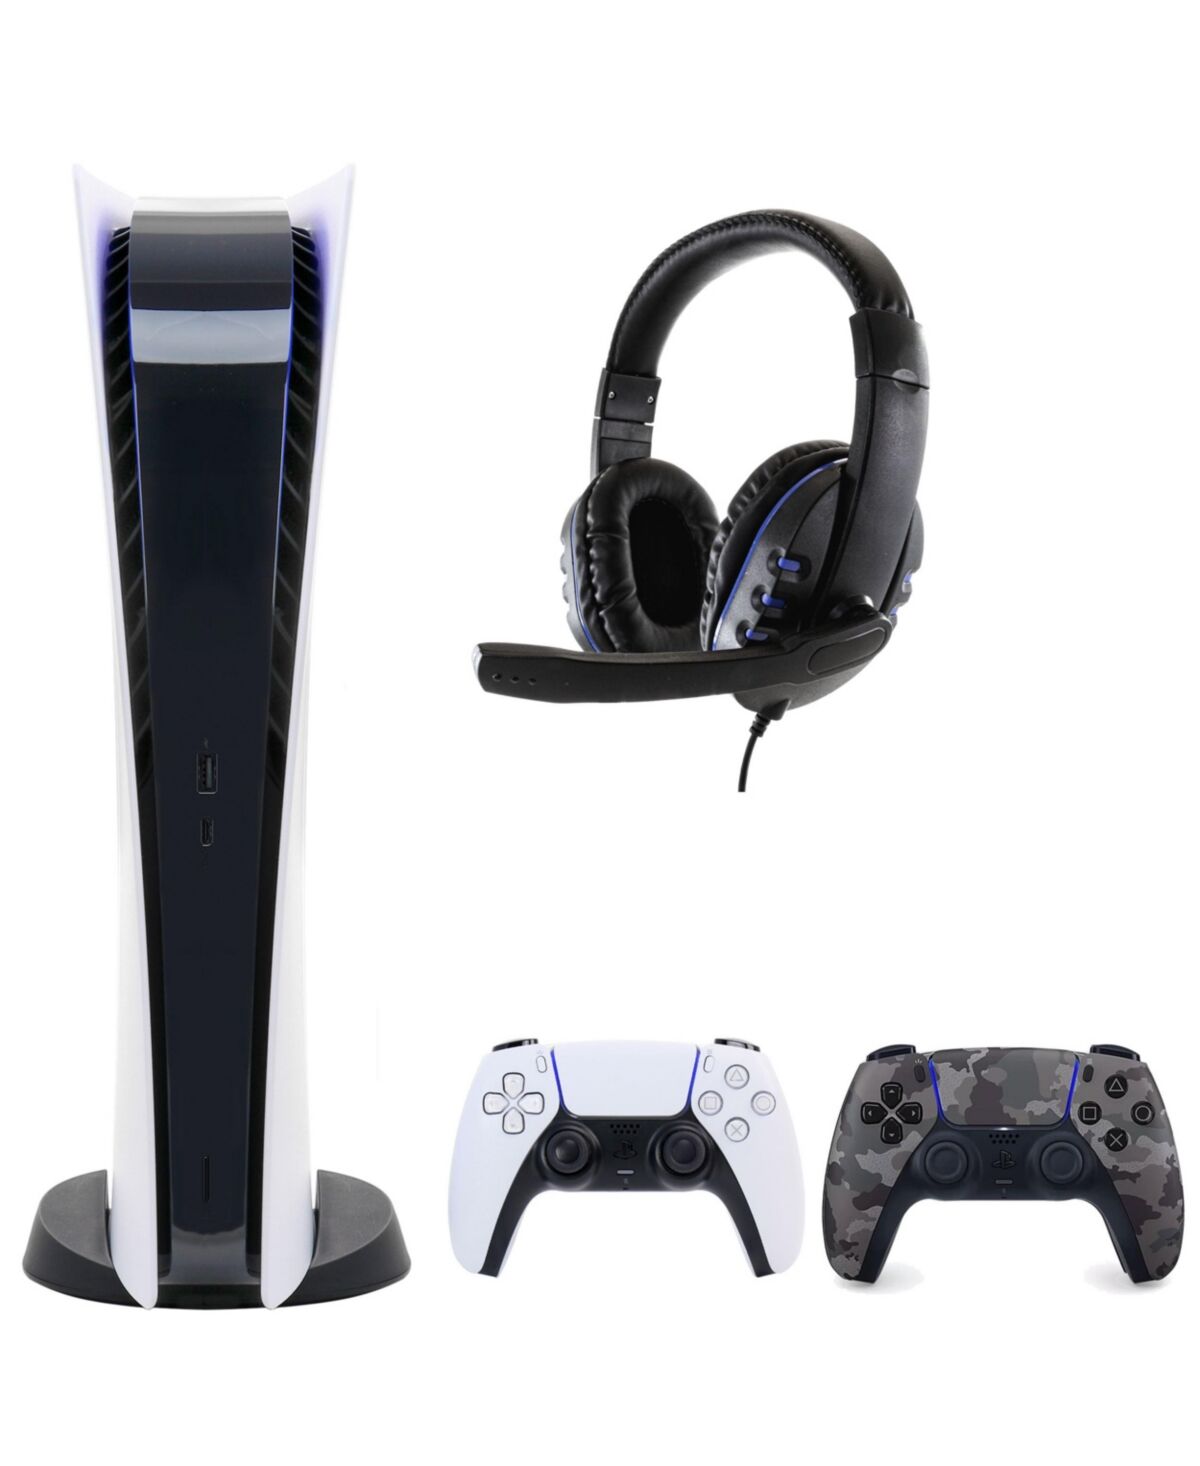 Playstation PS5 Digital Console w/ Extra Dualsense Controller & Universal Headset - Open White